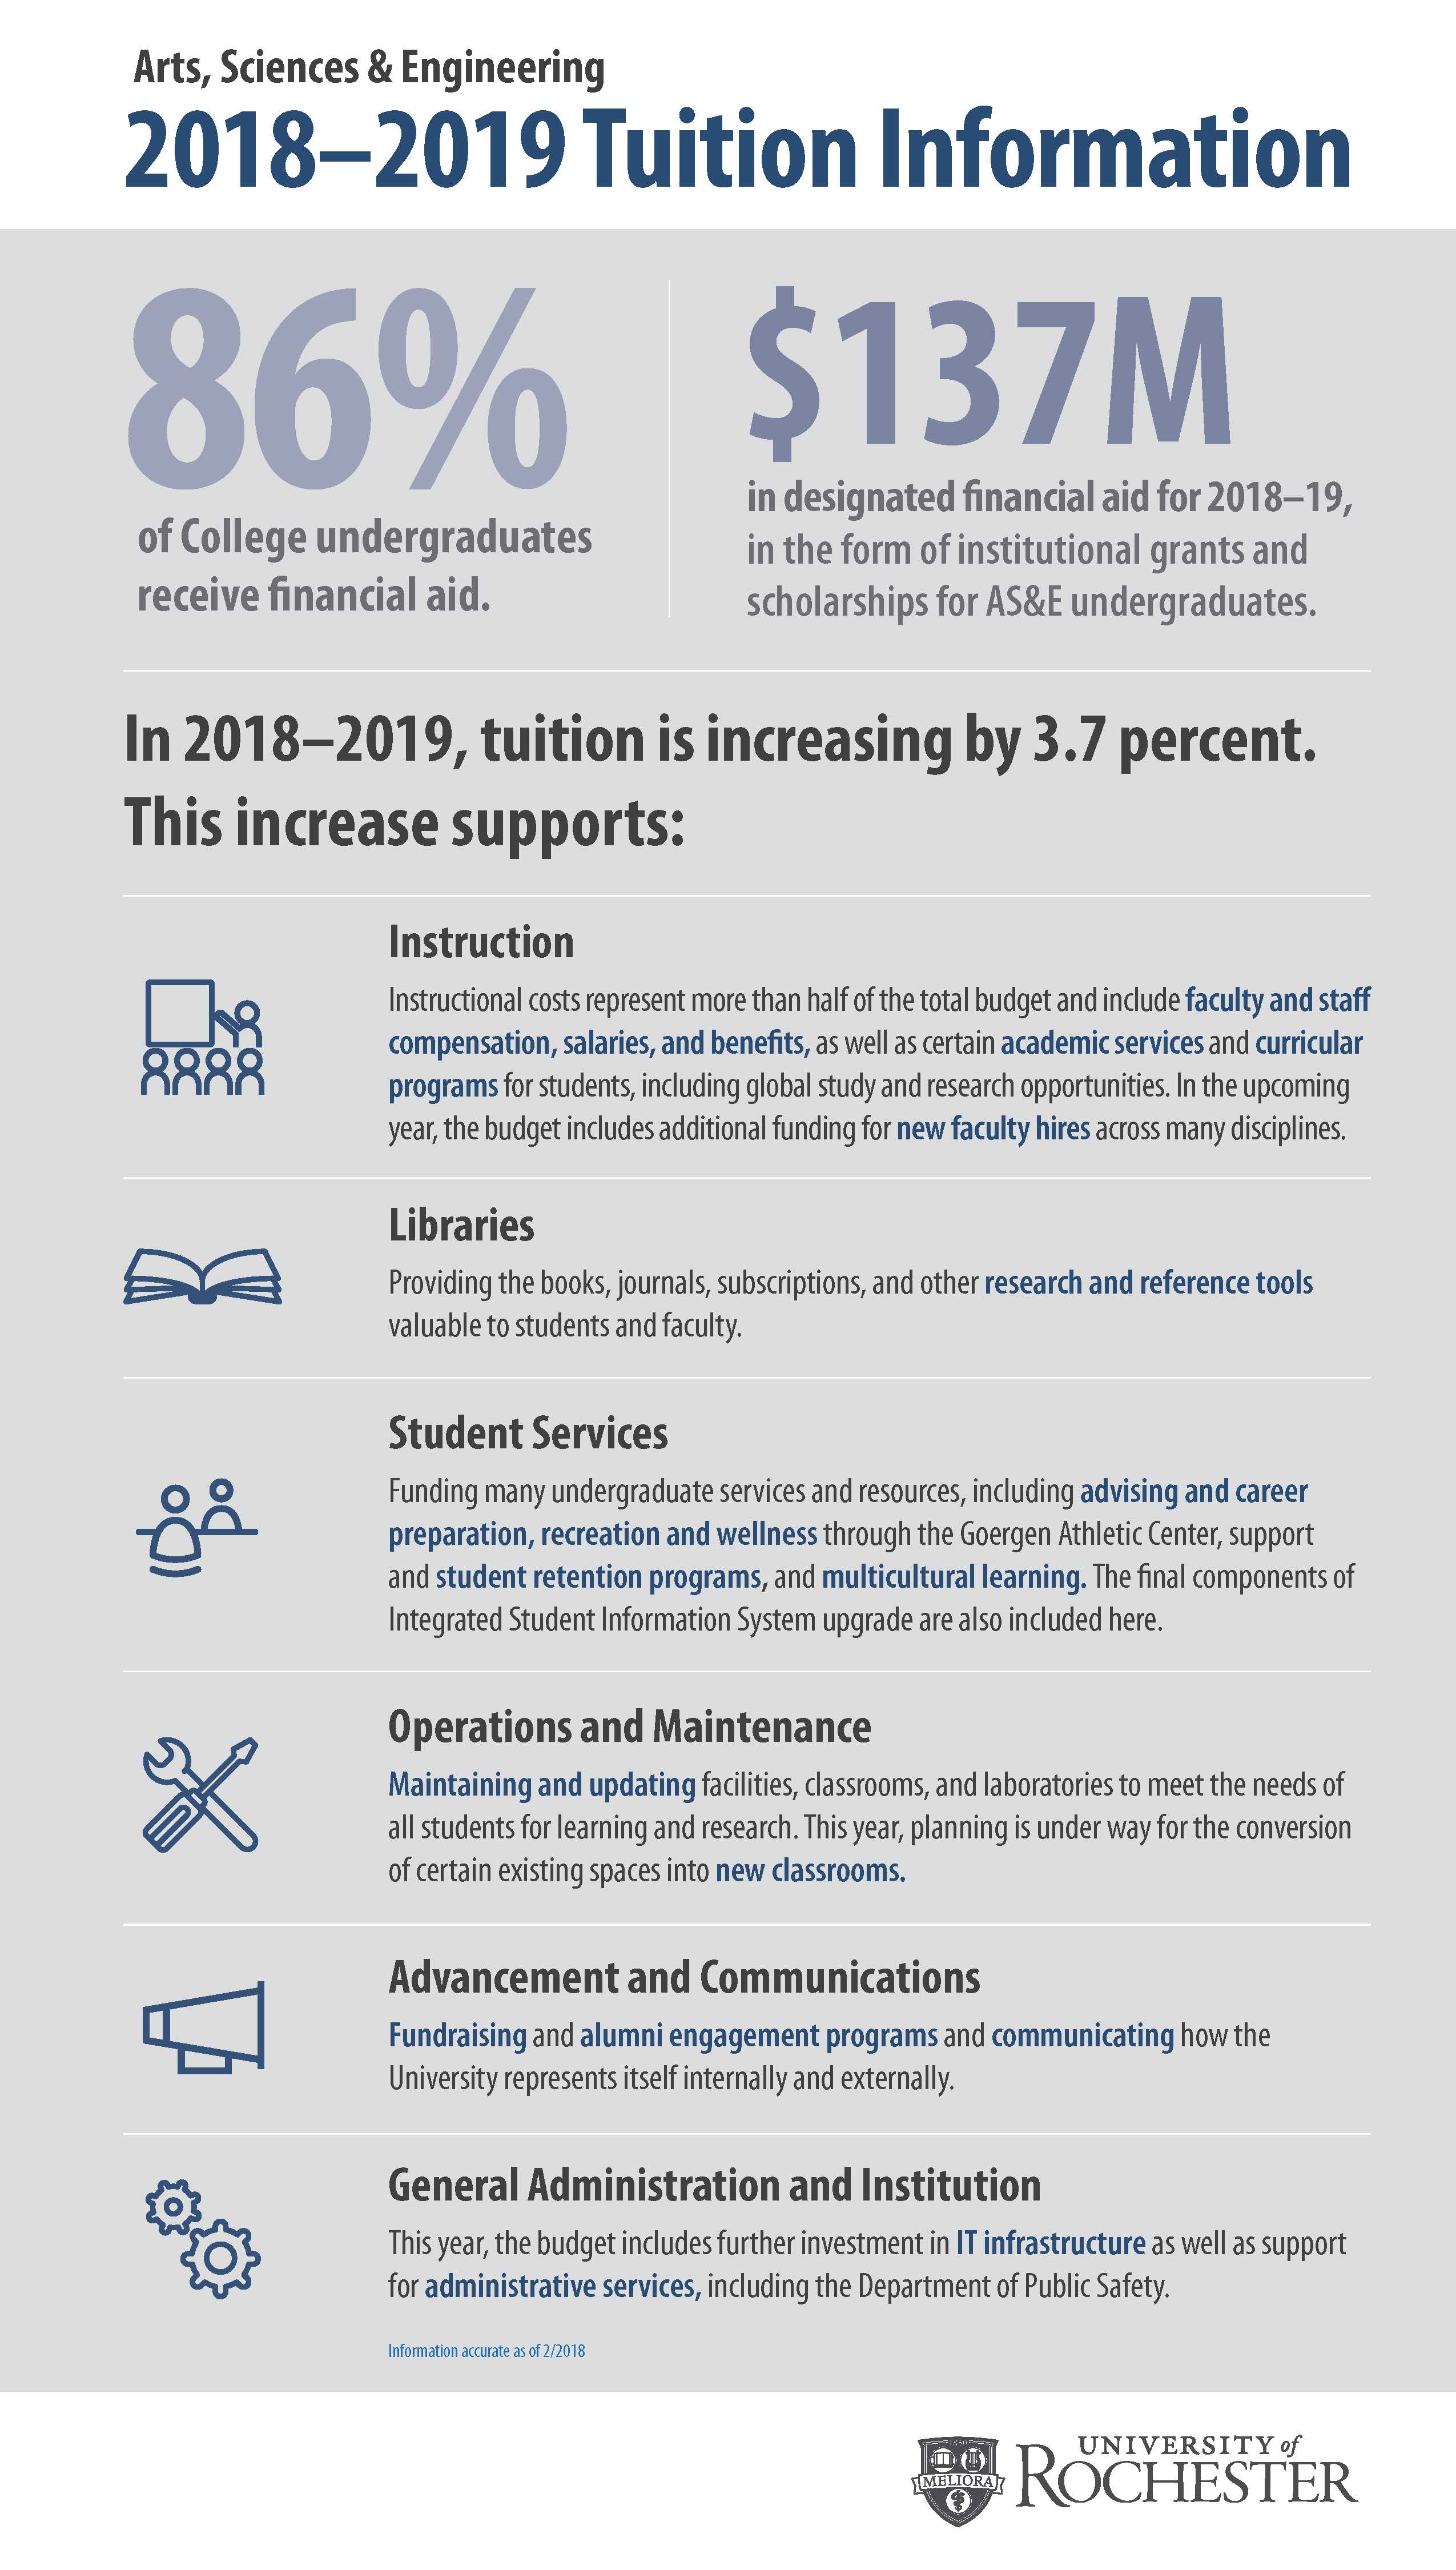 Arts, Sciences & Engineering  2018–2019 Tuition Information     86% of College undergraduates receive financial aid.     $137M in designated financial aid for 2018–19, in the form of institutional grants and scholarships for AS&E undergraduates.     In 2018–2019, tuition is increasing by 3.7 percent.  This increase supports:     Instruction  Instructional costs represent more than half of the total budget and include faculty and staff compensation, salaries, and benefits, as well as certain academic services and curricular programs for students, including global study and research opportunities. In the upcoming year, the budget includes additional funding for new faculty hires across many disciplines.     Libraries  Providing the books, journals, subscriptions, and other research and reference tools  valuable to students and faculty.     Student Services  Funding many undergraduate services and resources, including advising and career preparation, recreation and wellness through the Goergen Athletic Center, support and student retention programs, and multicultural learning. The final components of Integrated Student Information System upgrade are also included here.     Operations and Maintenance  Maintaining and updating facilities, classrooms, and laboratories to meet the needs of all students for learning and research. This year, planning is under way for the conversion of certain existing spaces into new classrooms.     Advancement and Communications  Fundraising and alumni engagement programs and communicating how the University represents itself internally and externally.     General Administration and Institution  This year, the budget includes further investment in IT infrastructure as well as support for administrative services, including the Department of Public Safety.     Information accurate as of 2/2018     University of Rochester